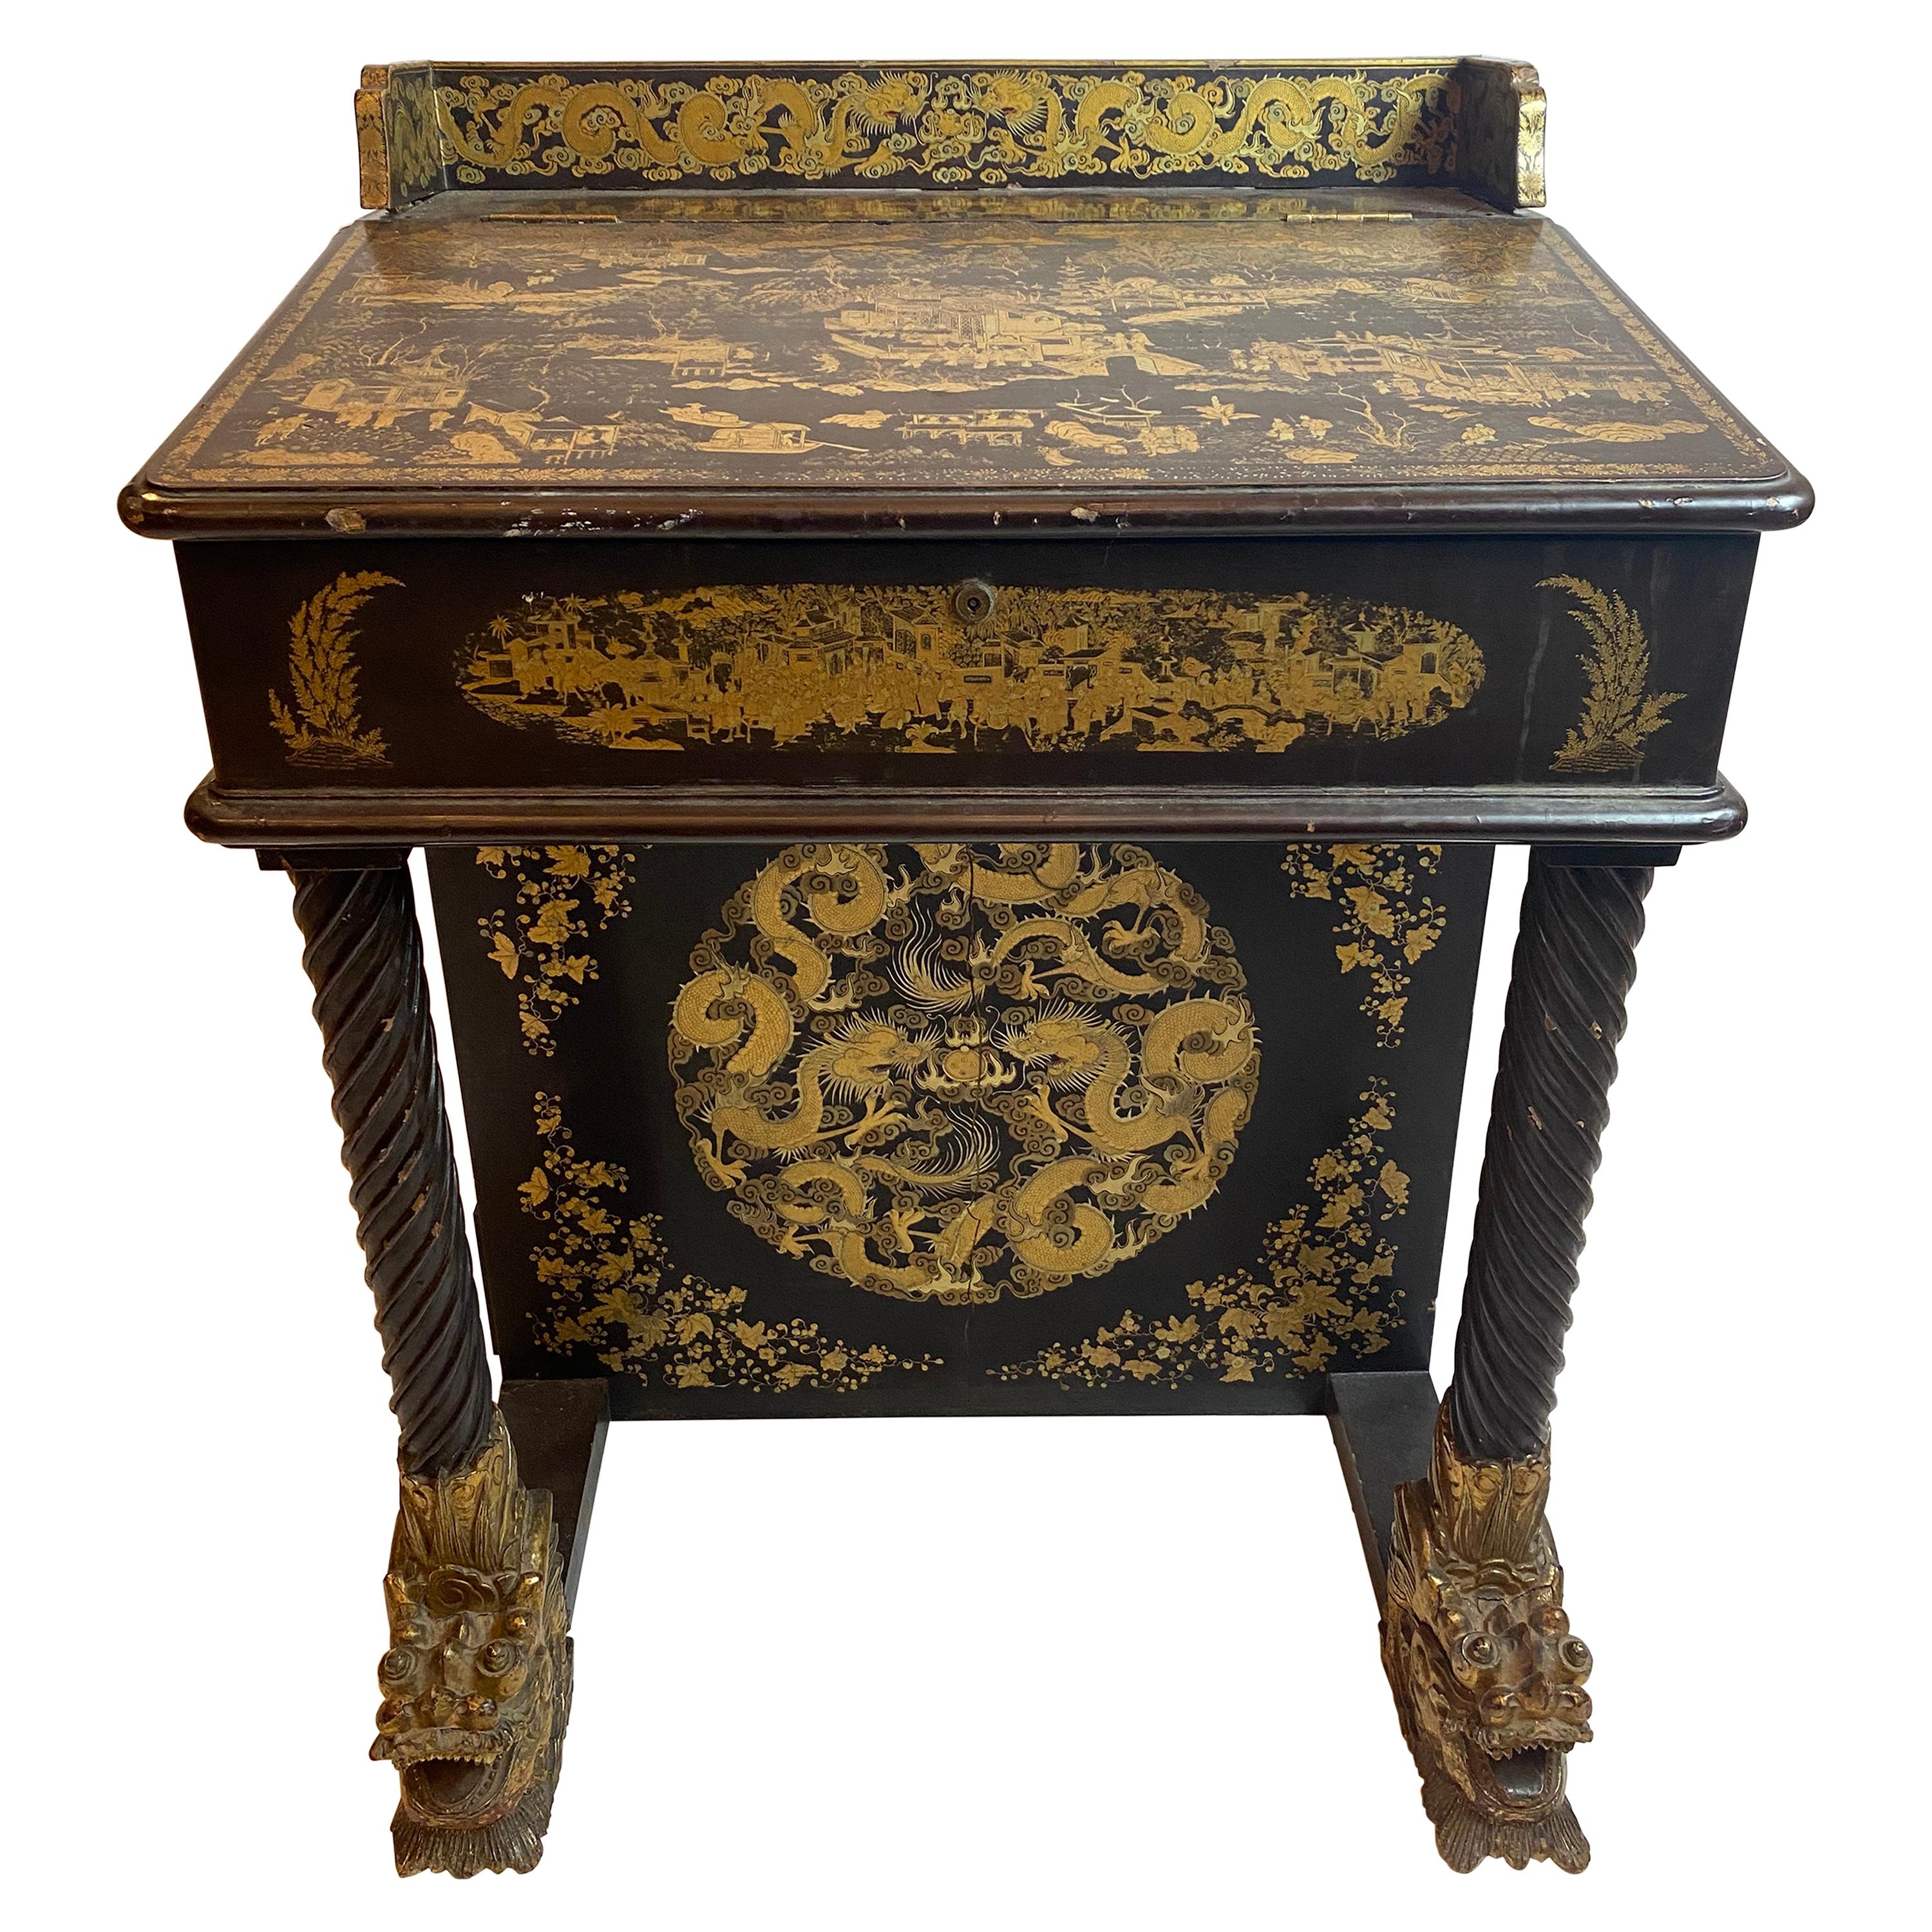 19th Century Chinese Export Lacquer and Gilt Davenport Desk